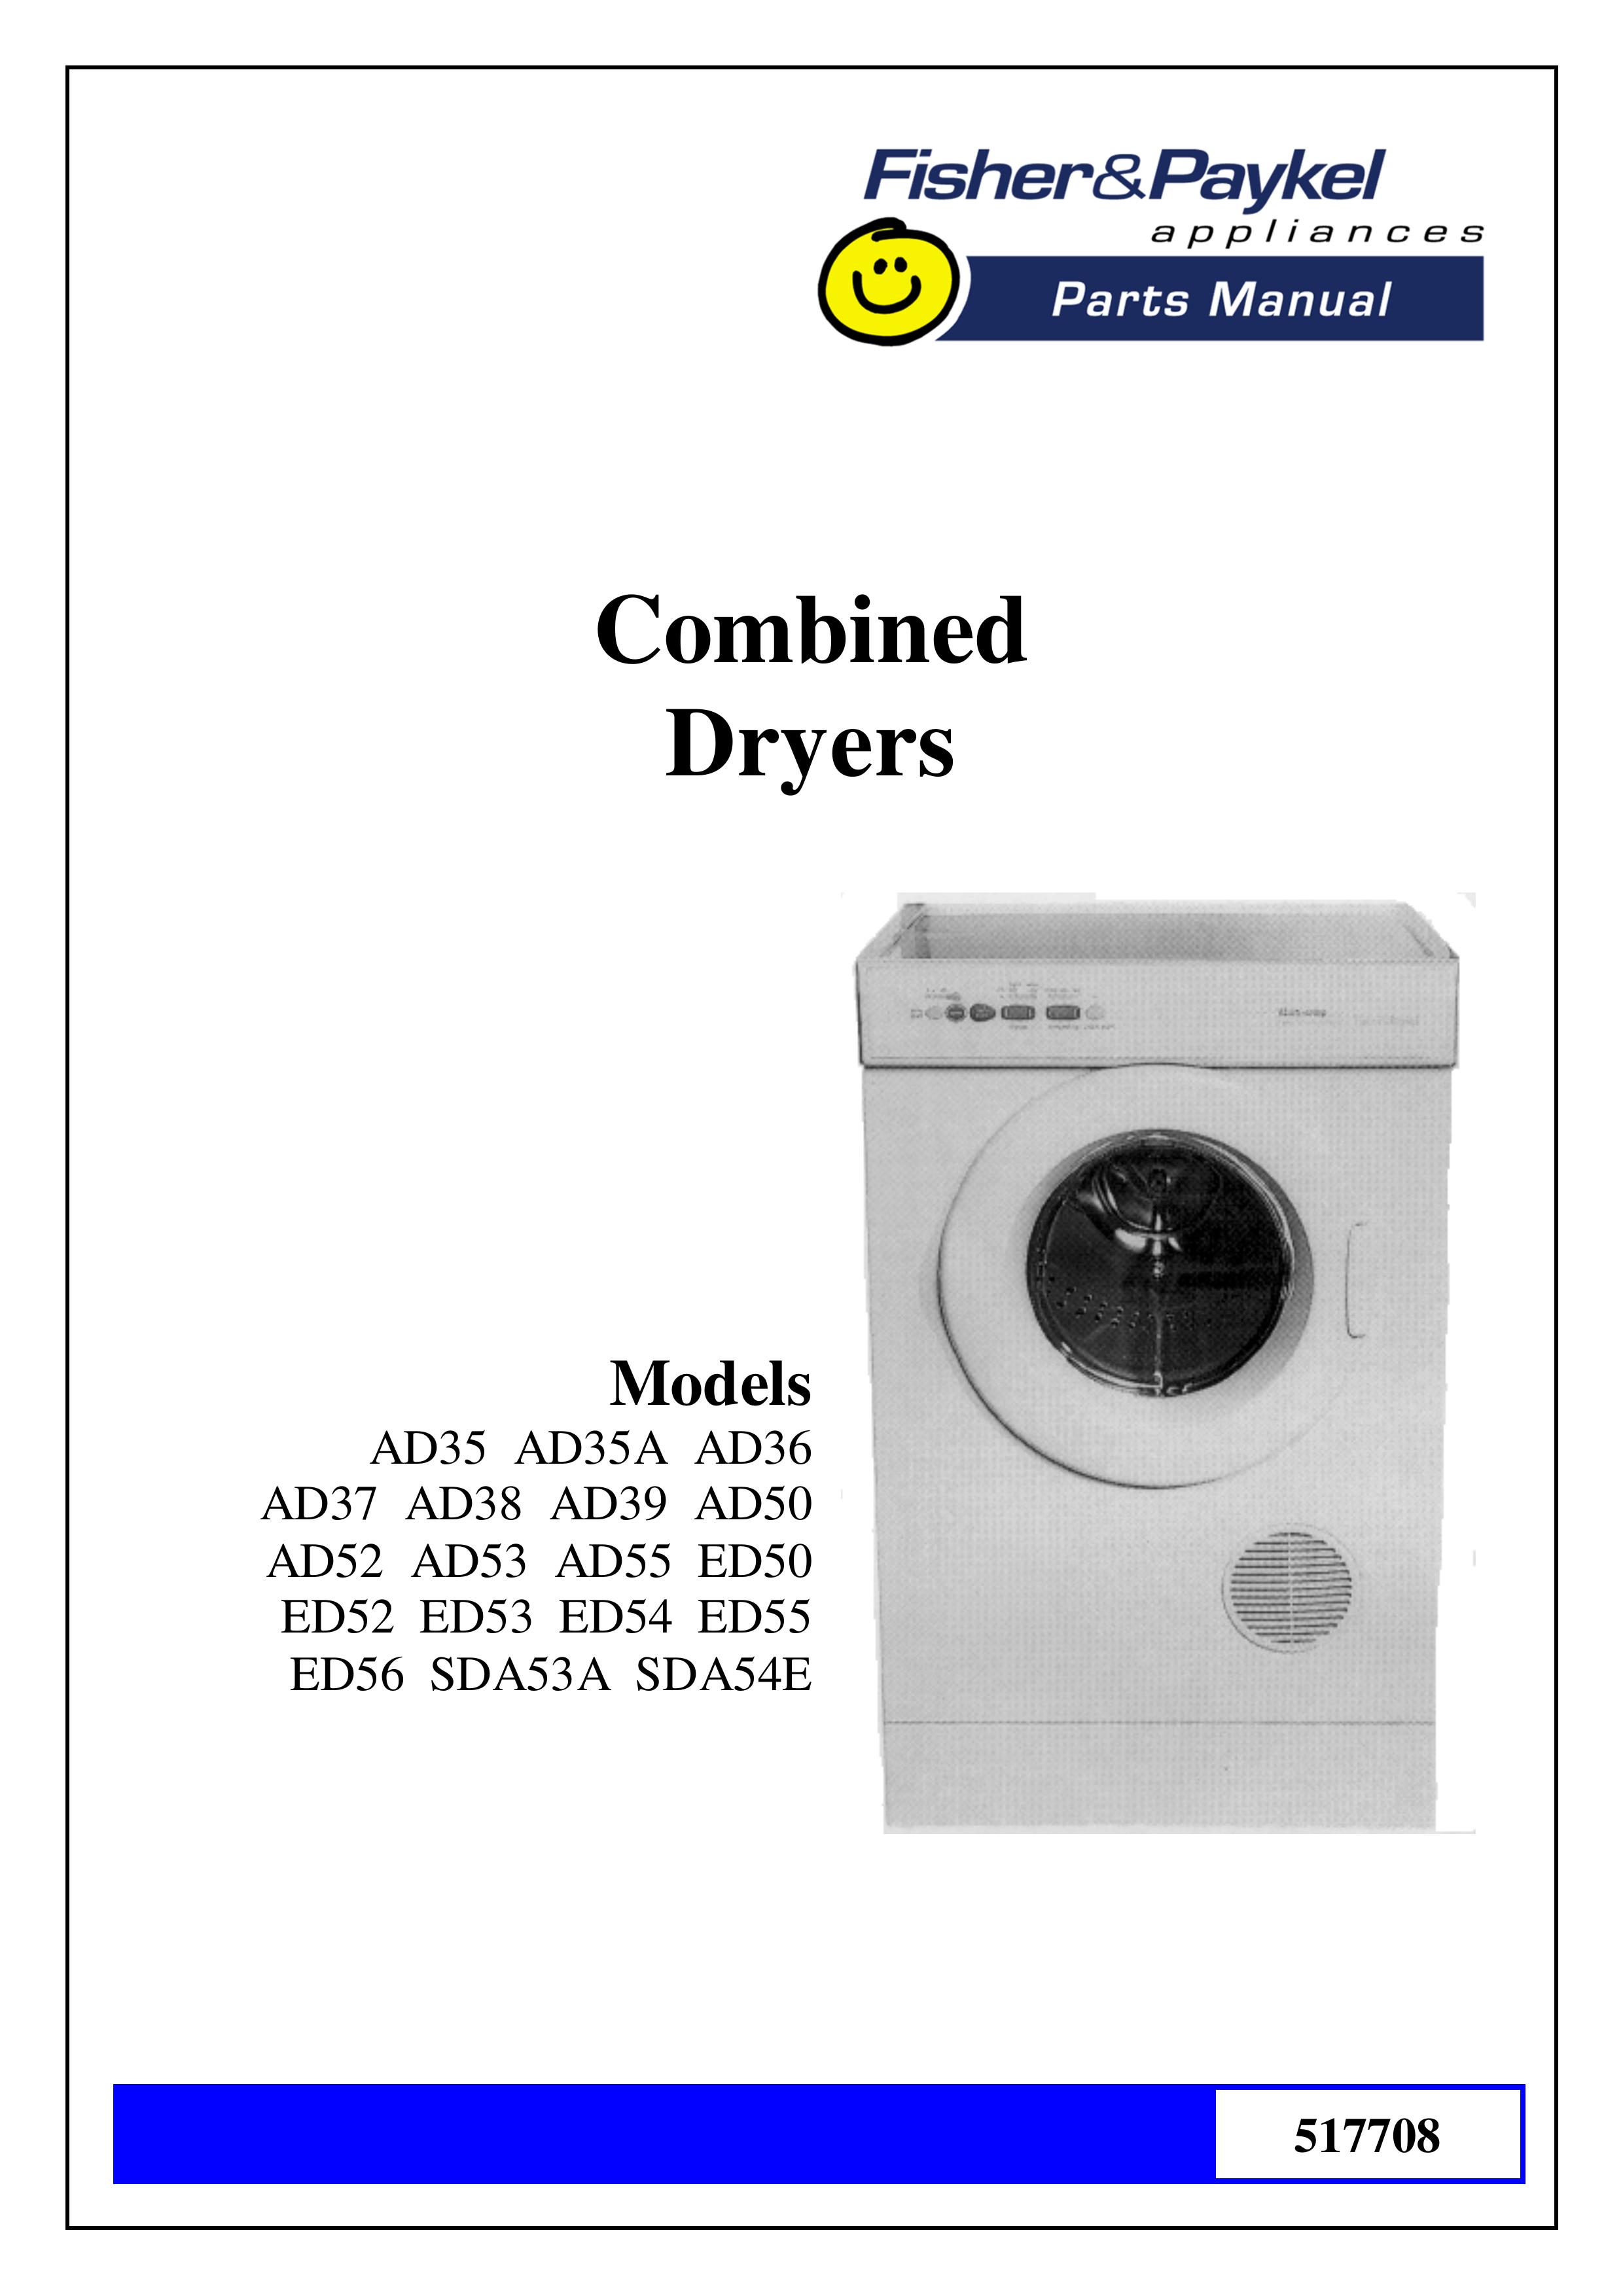 Fisher & Paykel ED52 Clothes Dryer User Manual